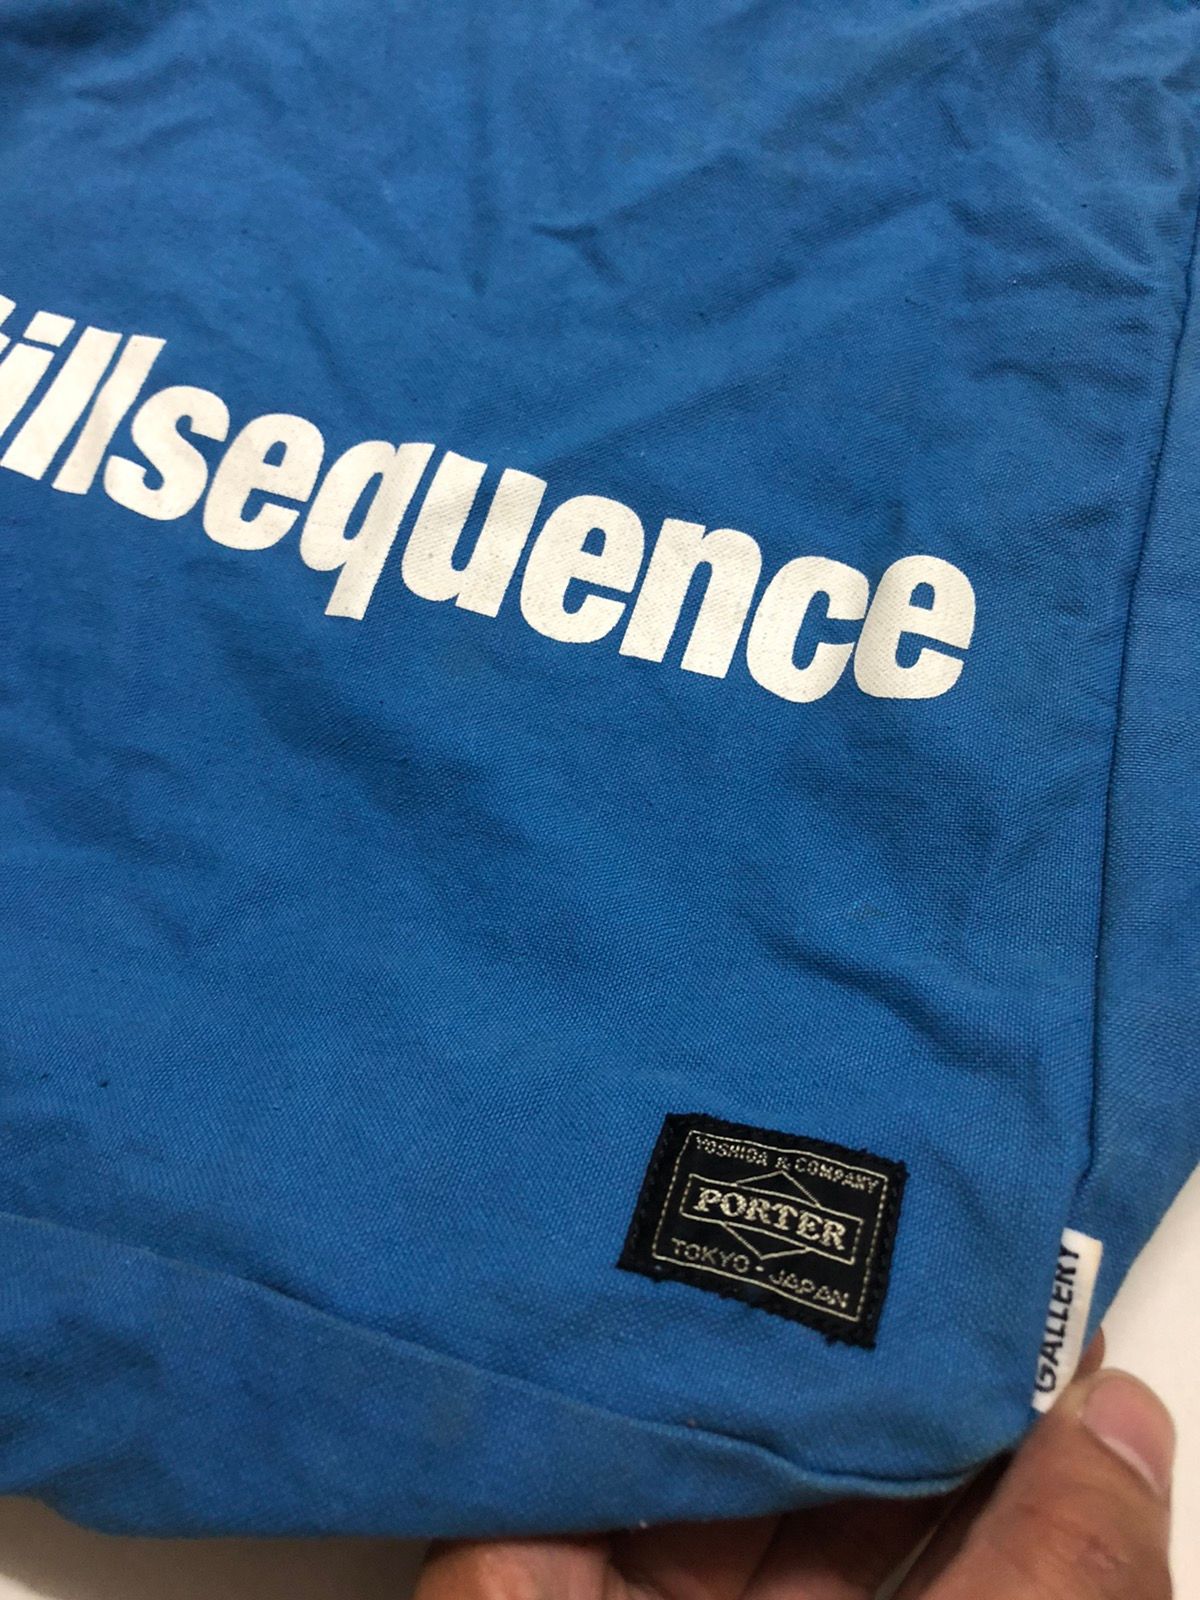 Porter X Gallery 1950 Quote Stillsequence Tote Bag - 3